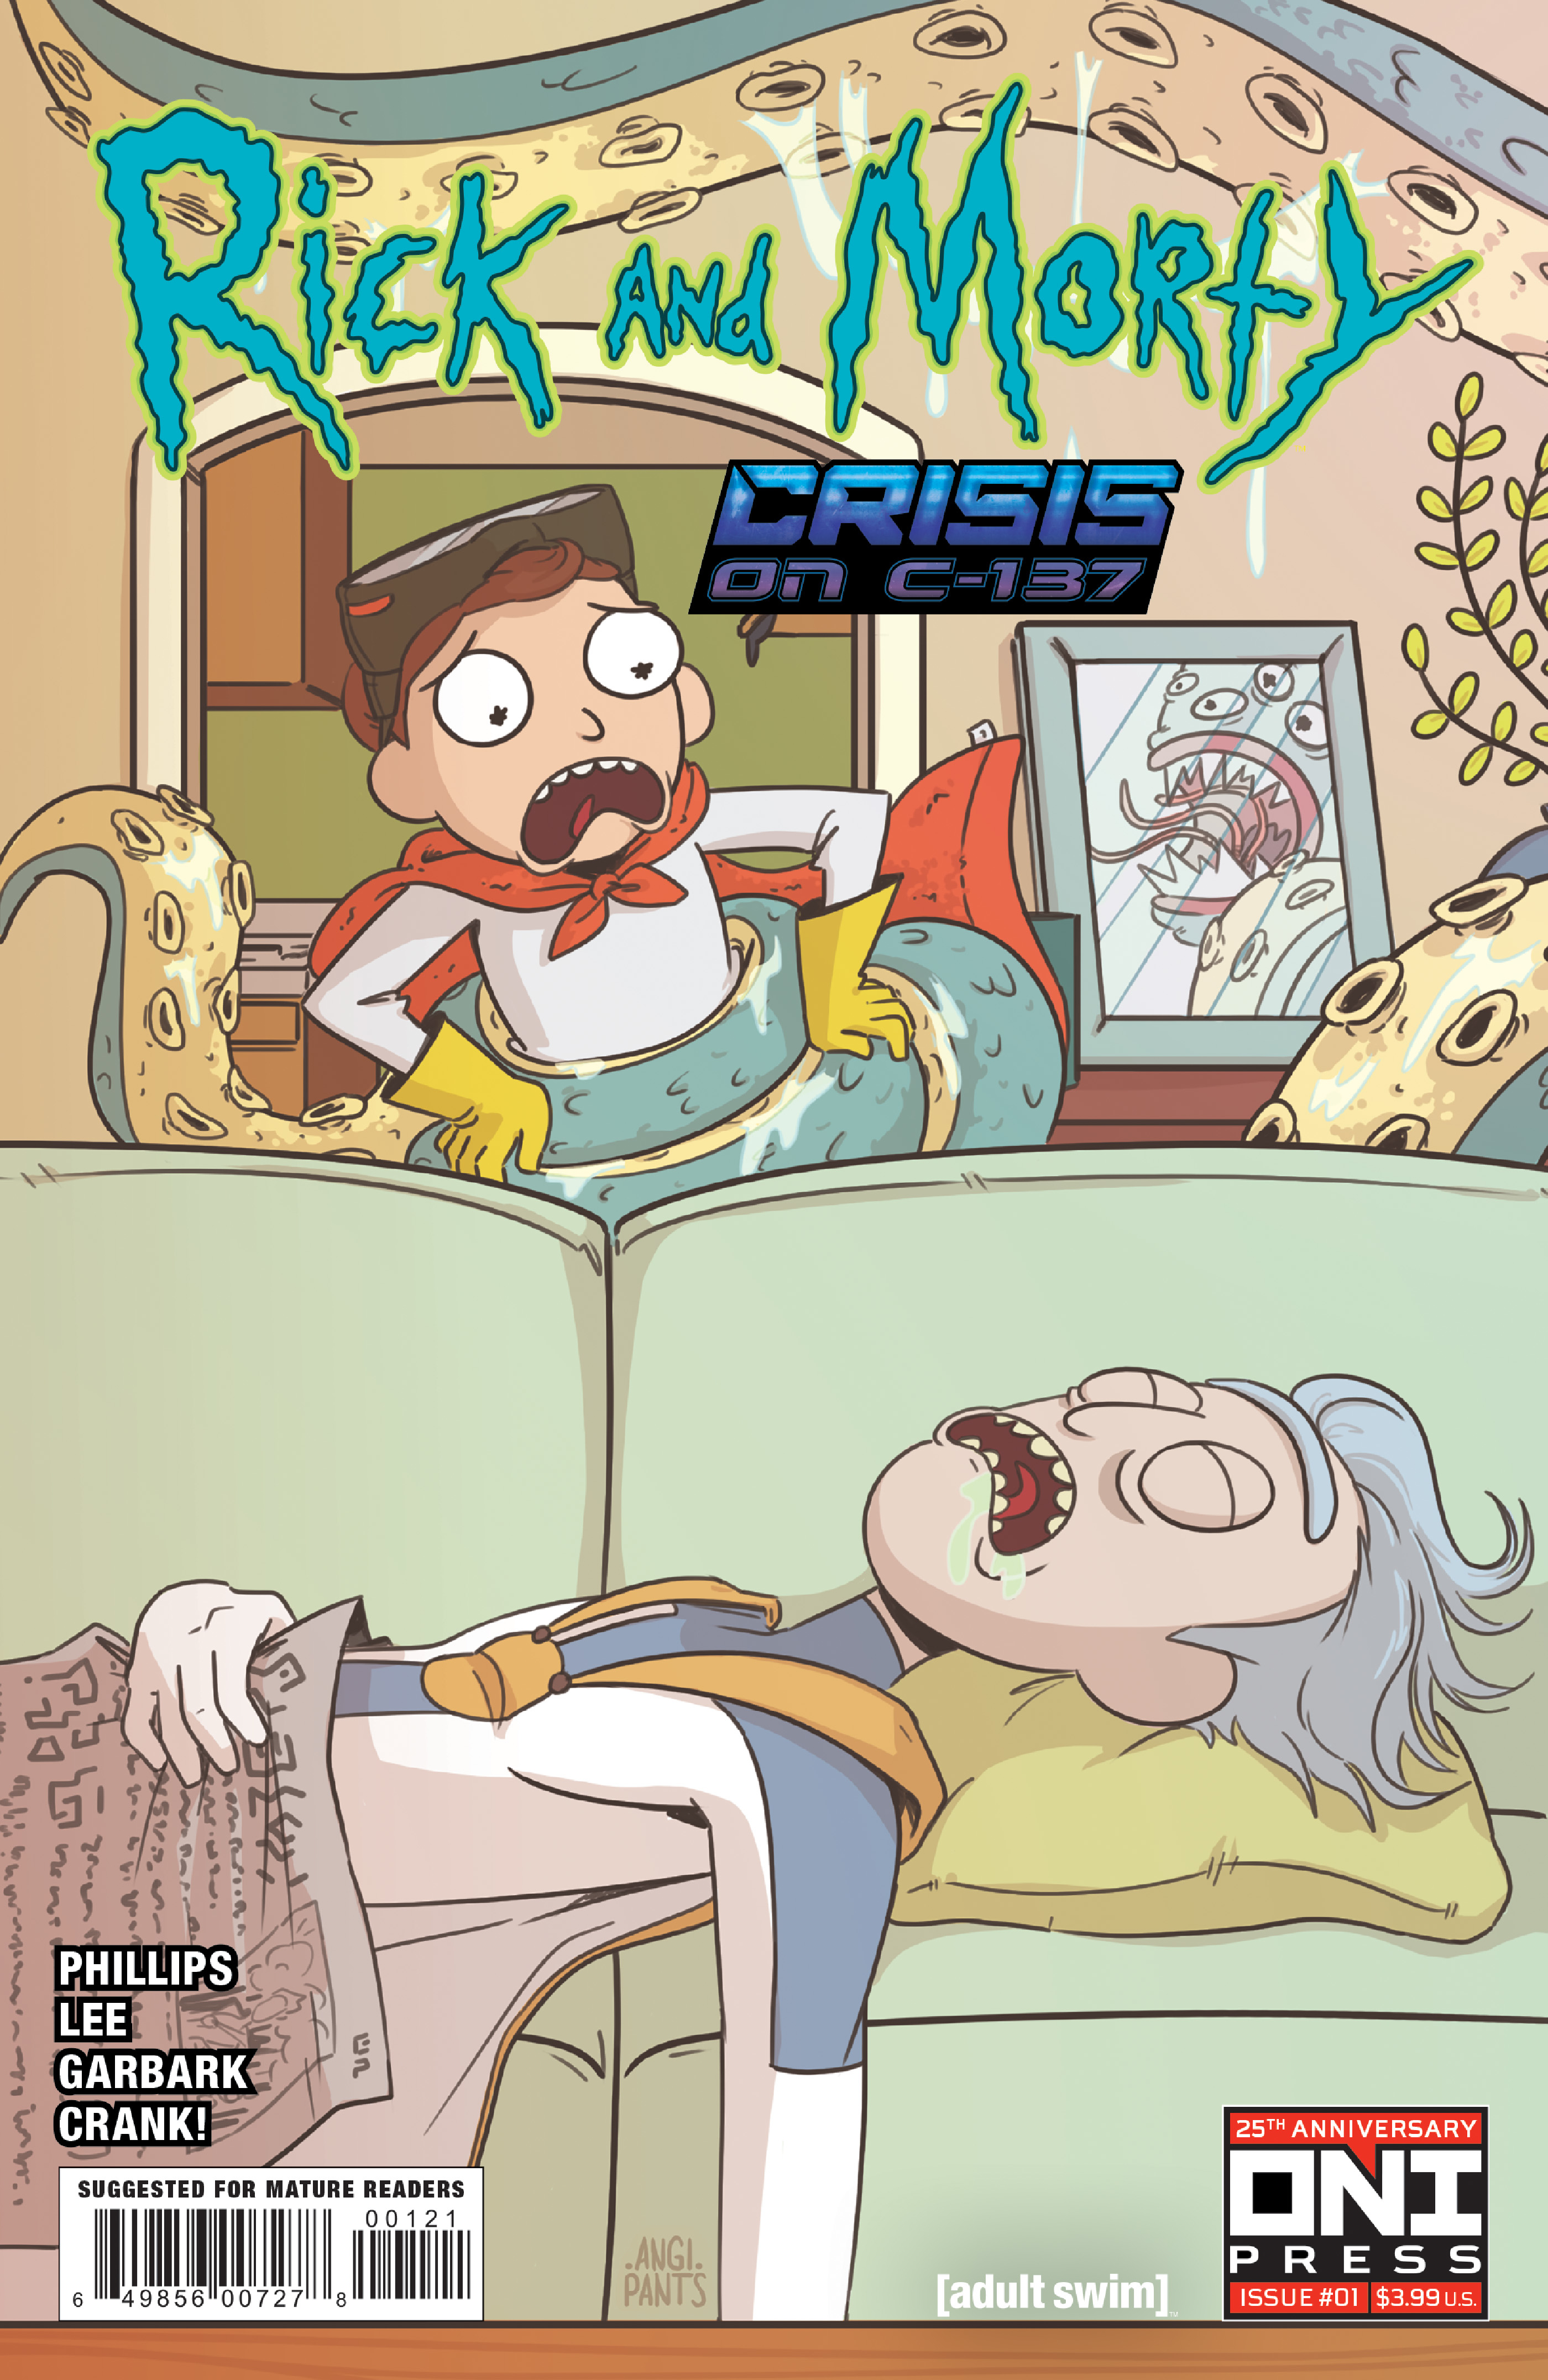 Rick and Morty Crisis On C 137 #1 Cover B Angela Trizzino (Of 4)